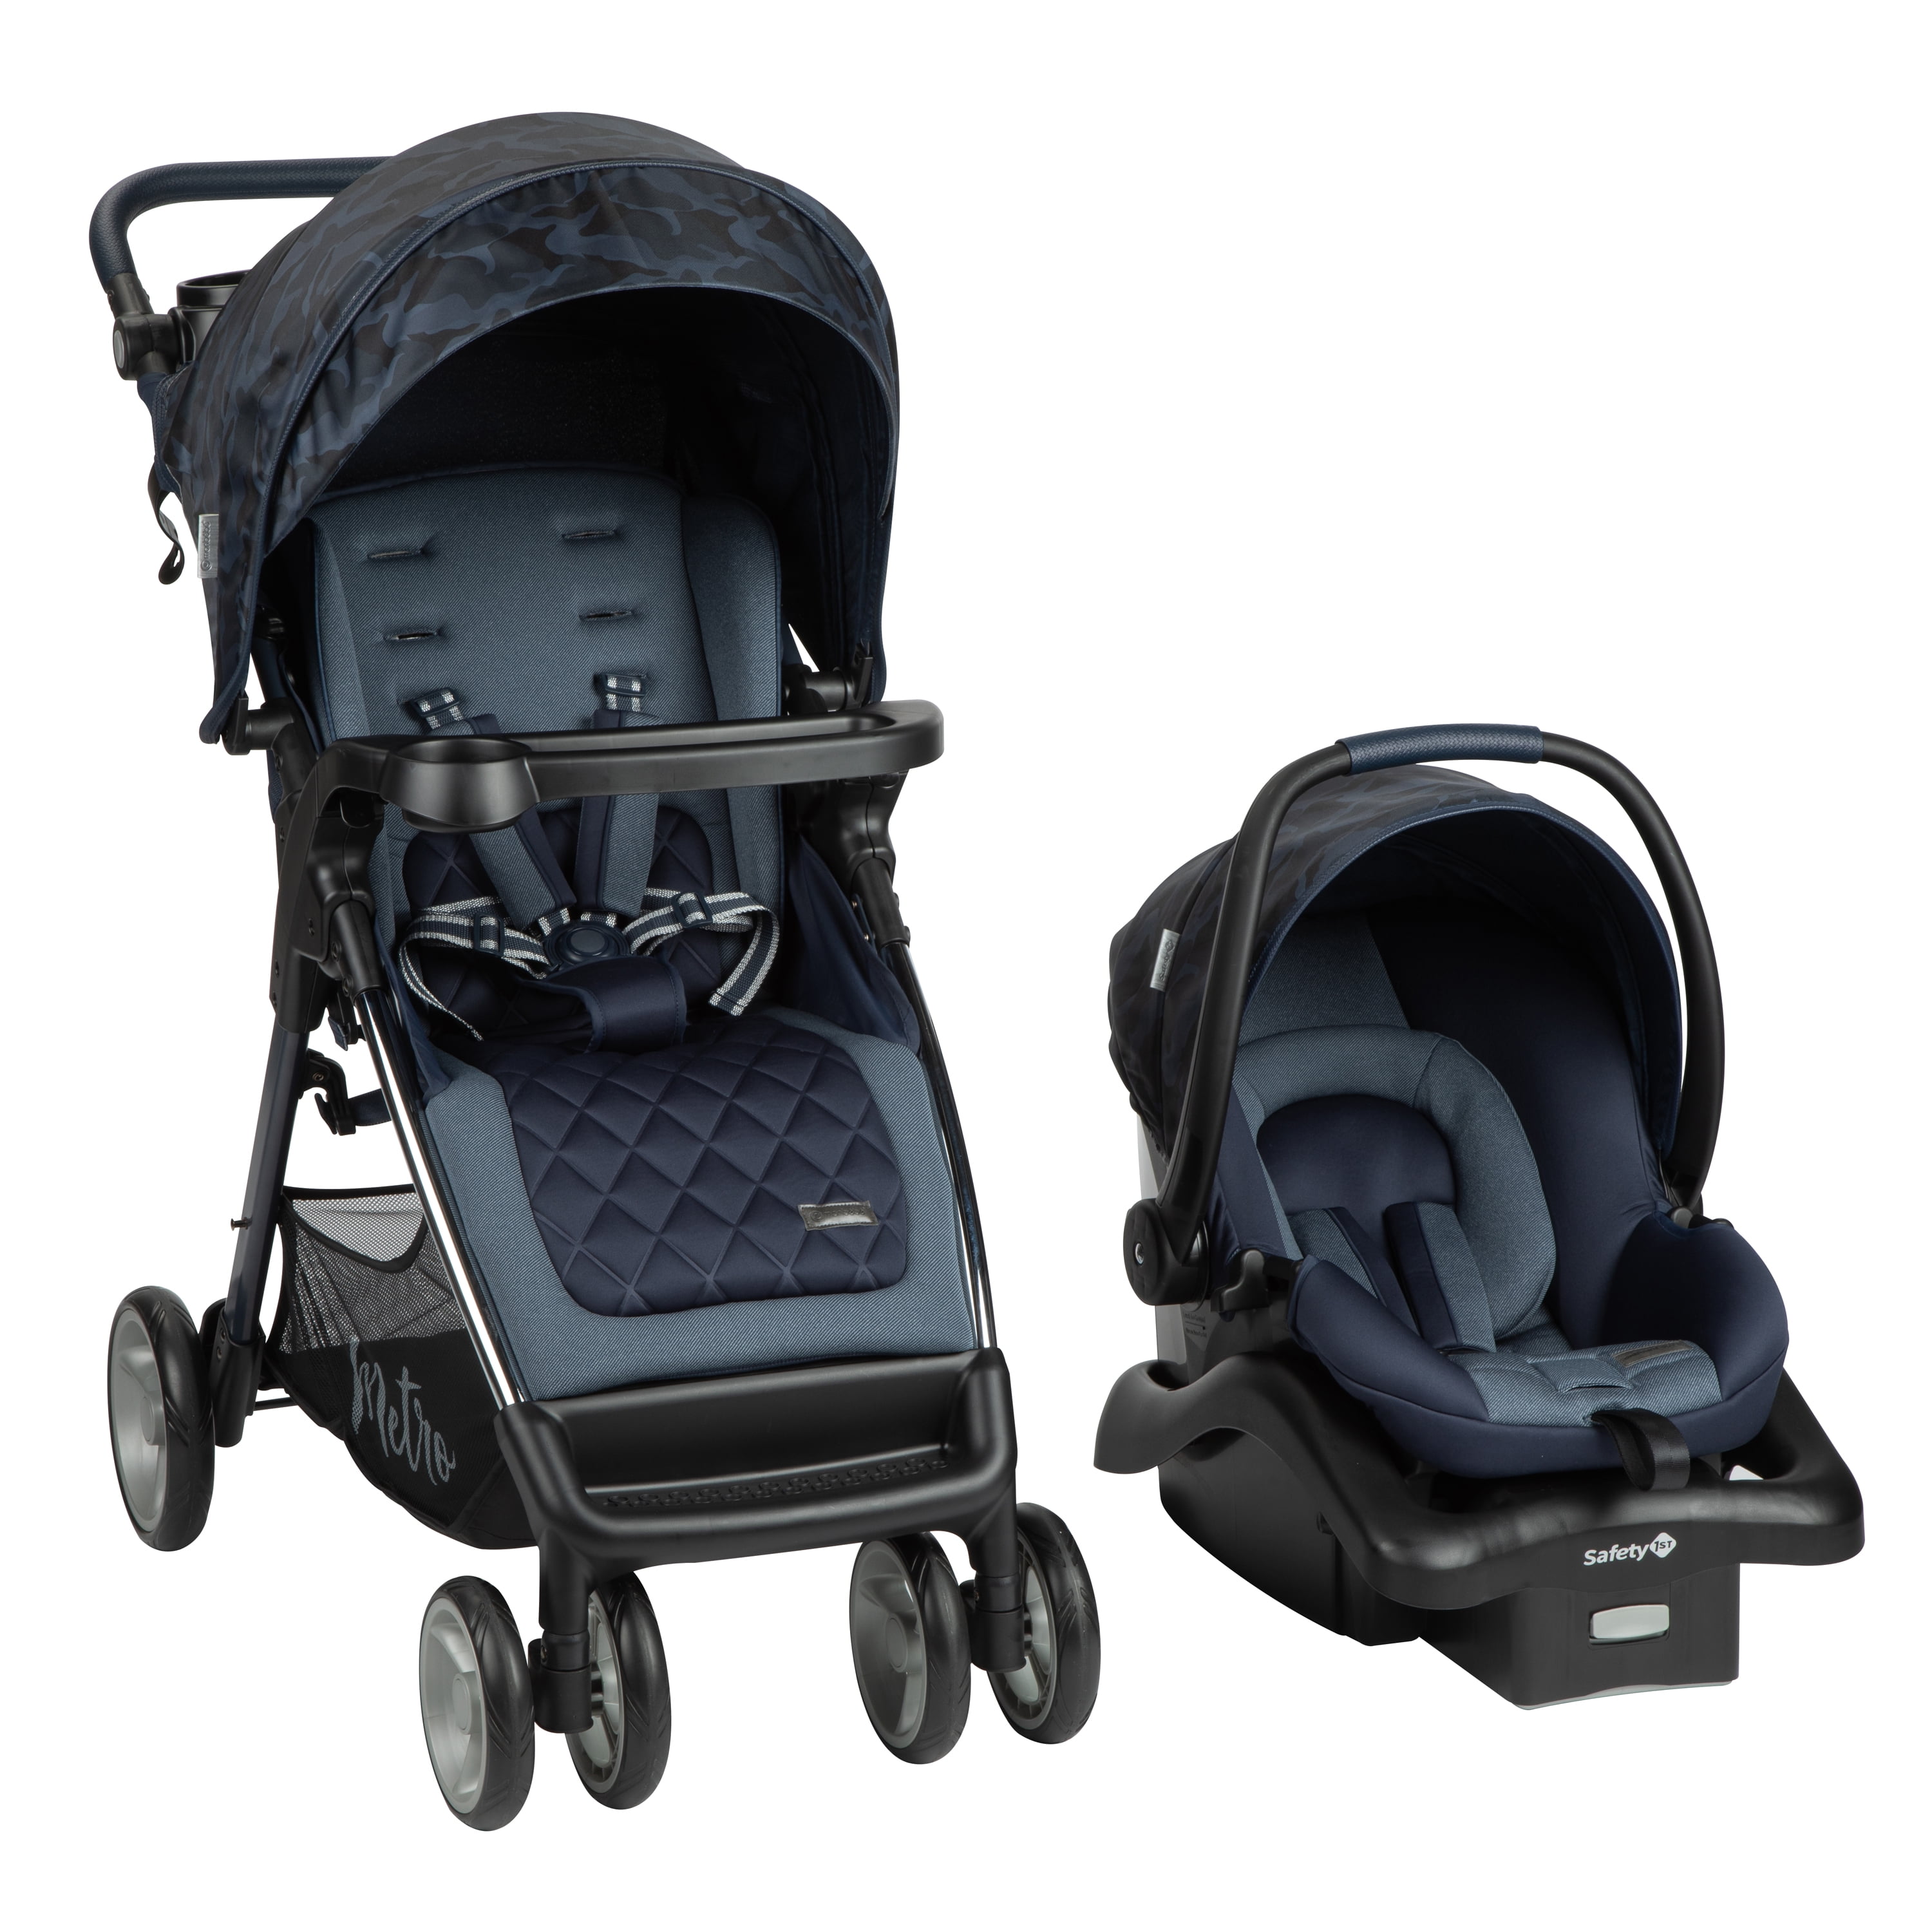 Four Seasons Available for Baby Strollers Cribs Outdoor Travel Car Mat Trolley Accessories SAIrch Baby Stroller Cushion Pad Baby Seat Liner 